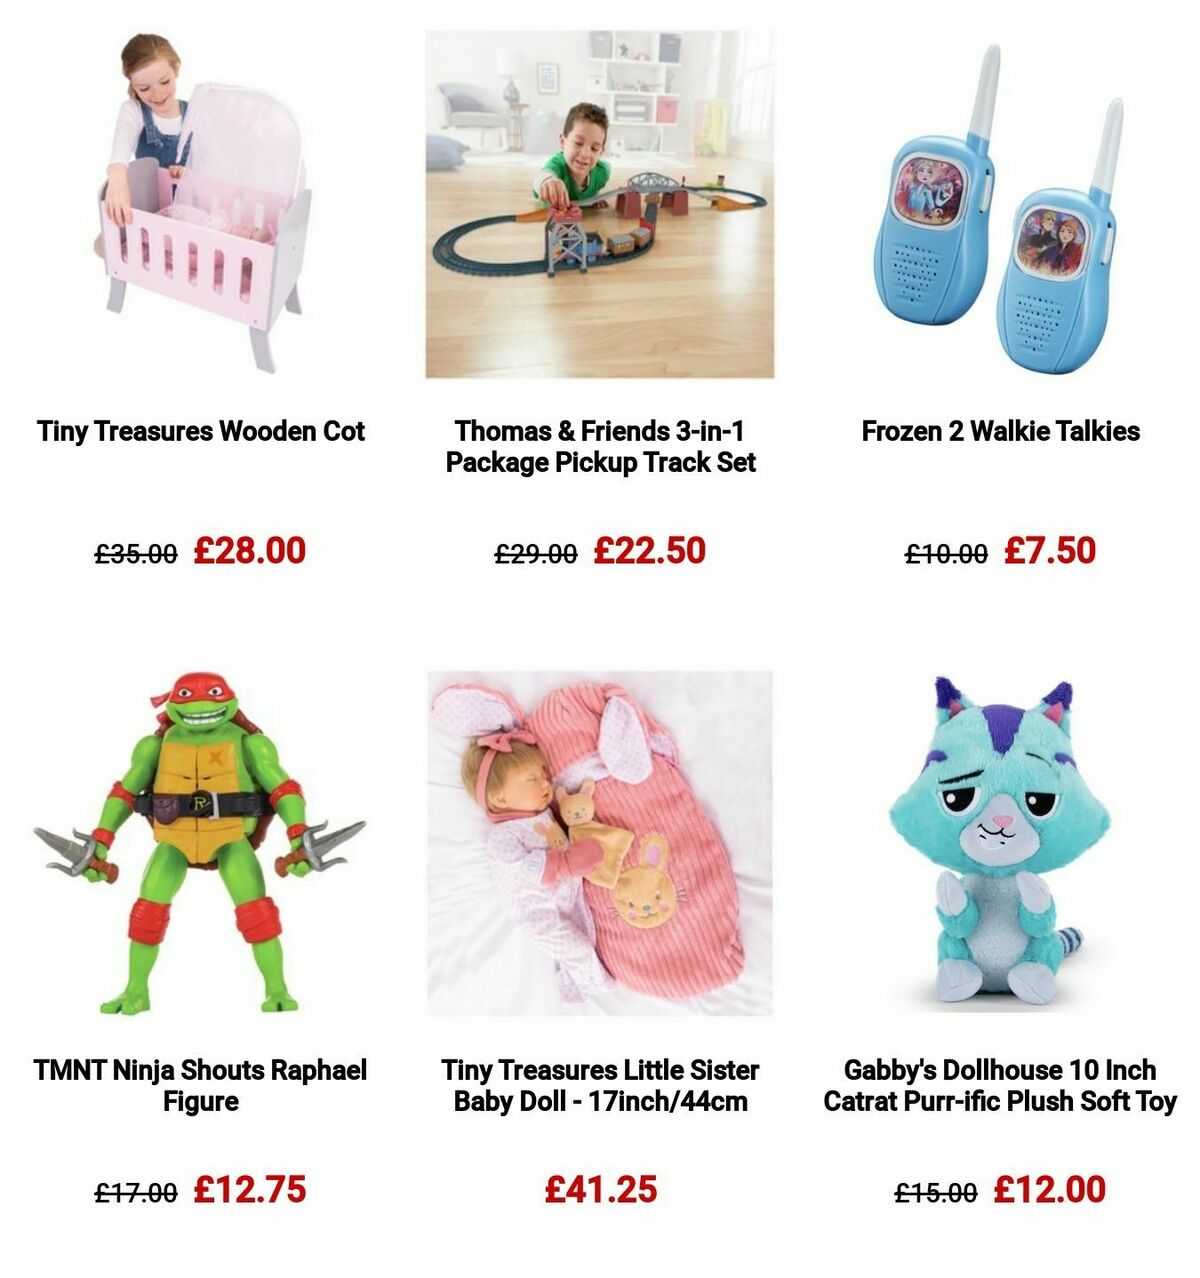 Argos Offers from 12 February